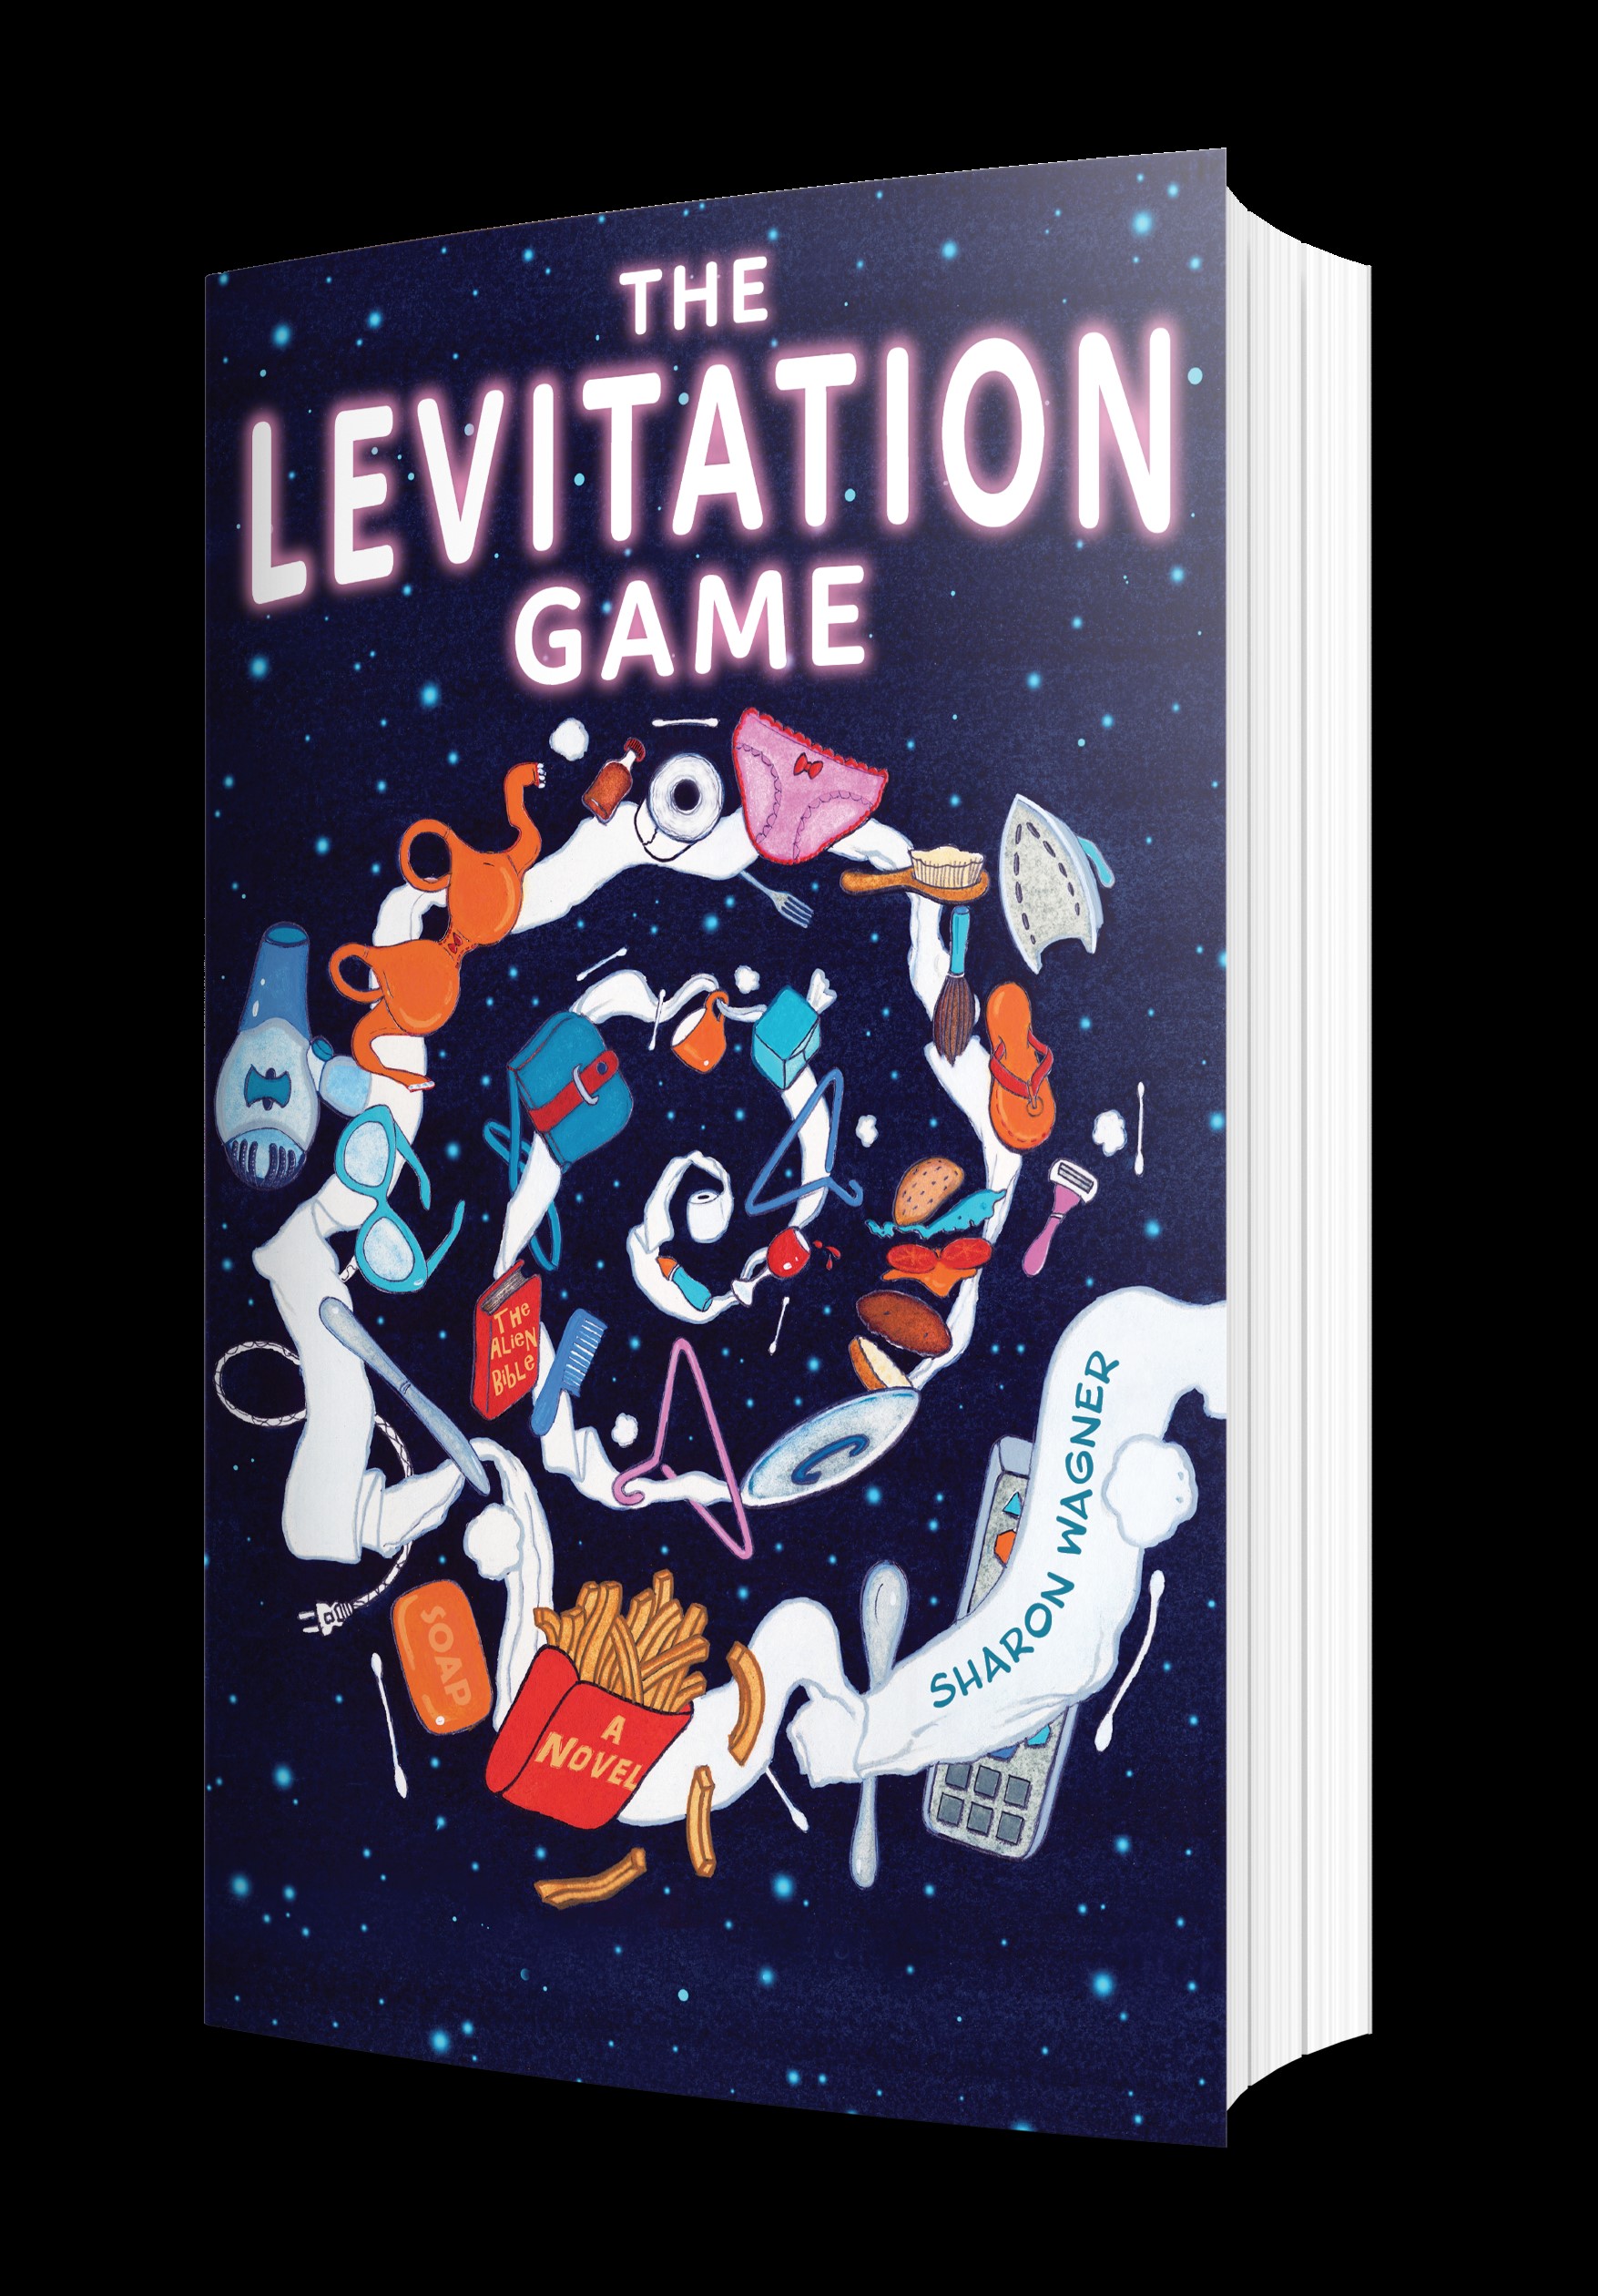 Levitation Game coming soon placeholder cover